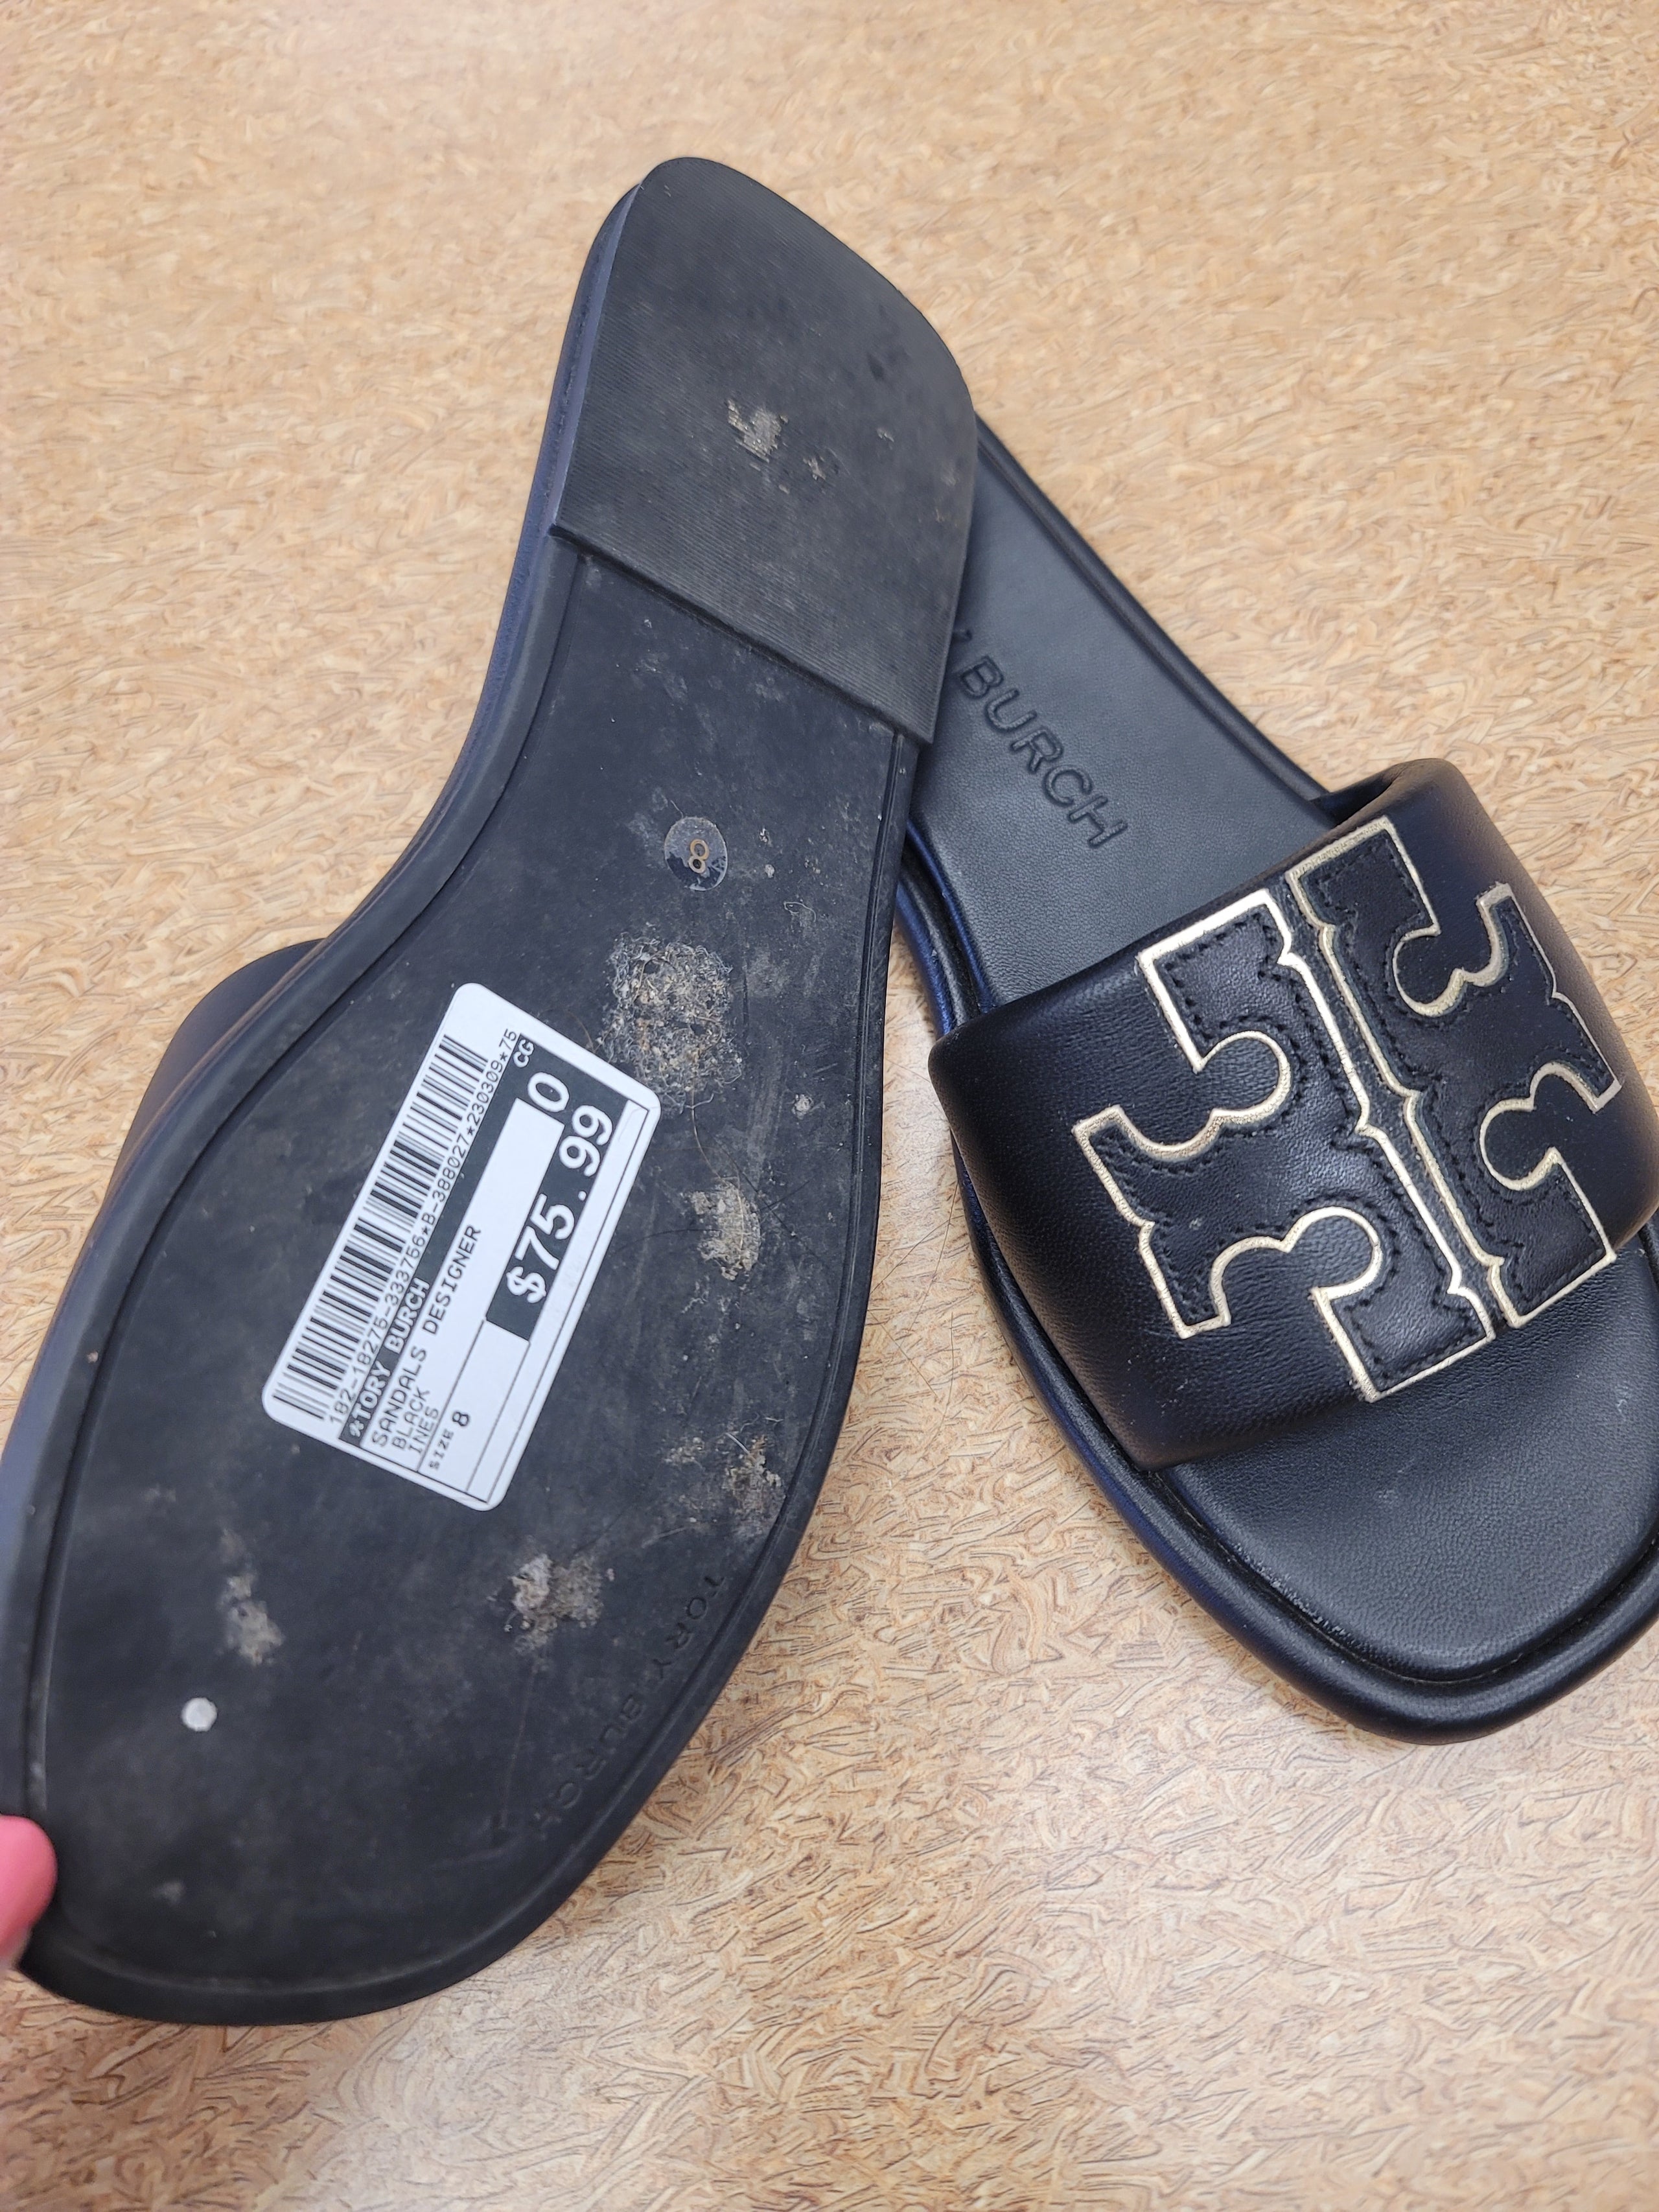 Tory Burch Ines Sandals Size 8 | Shop Clothes Mentor